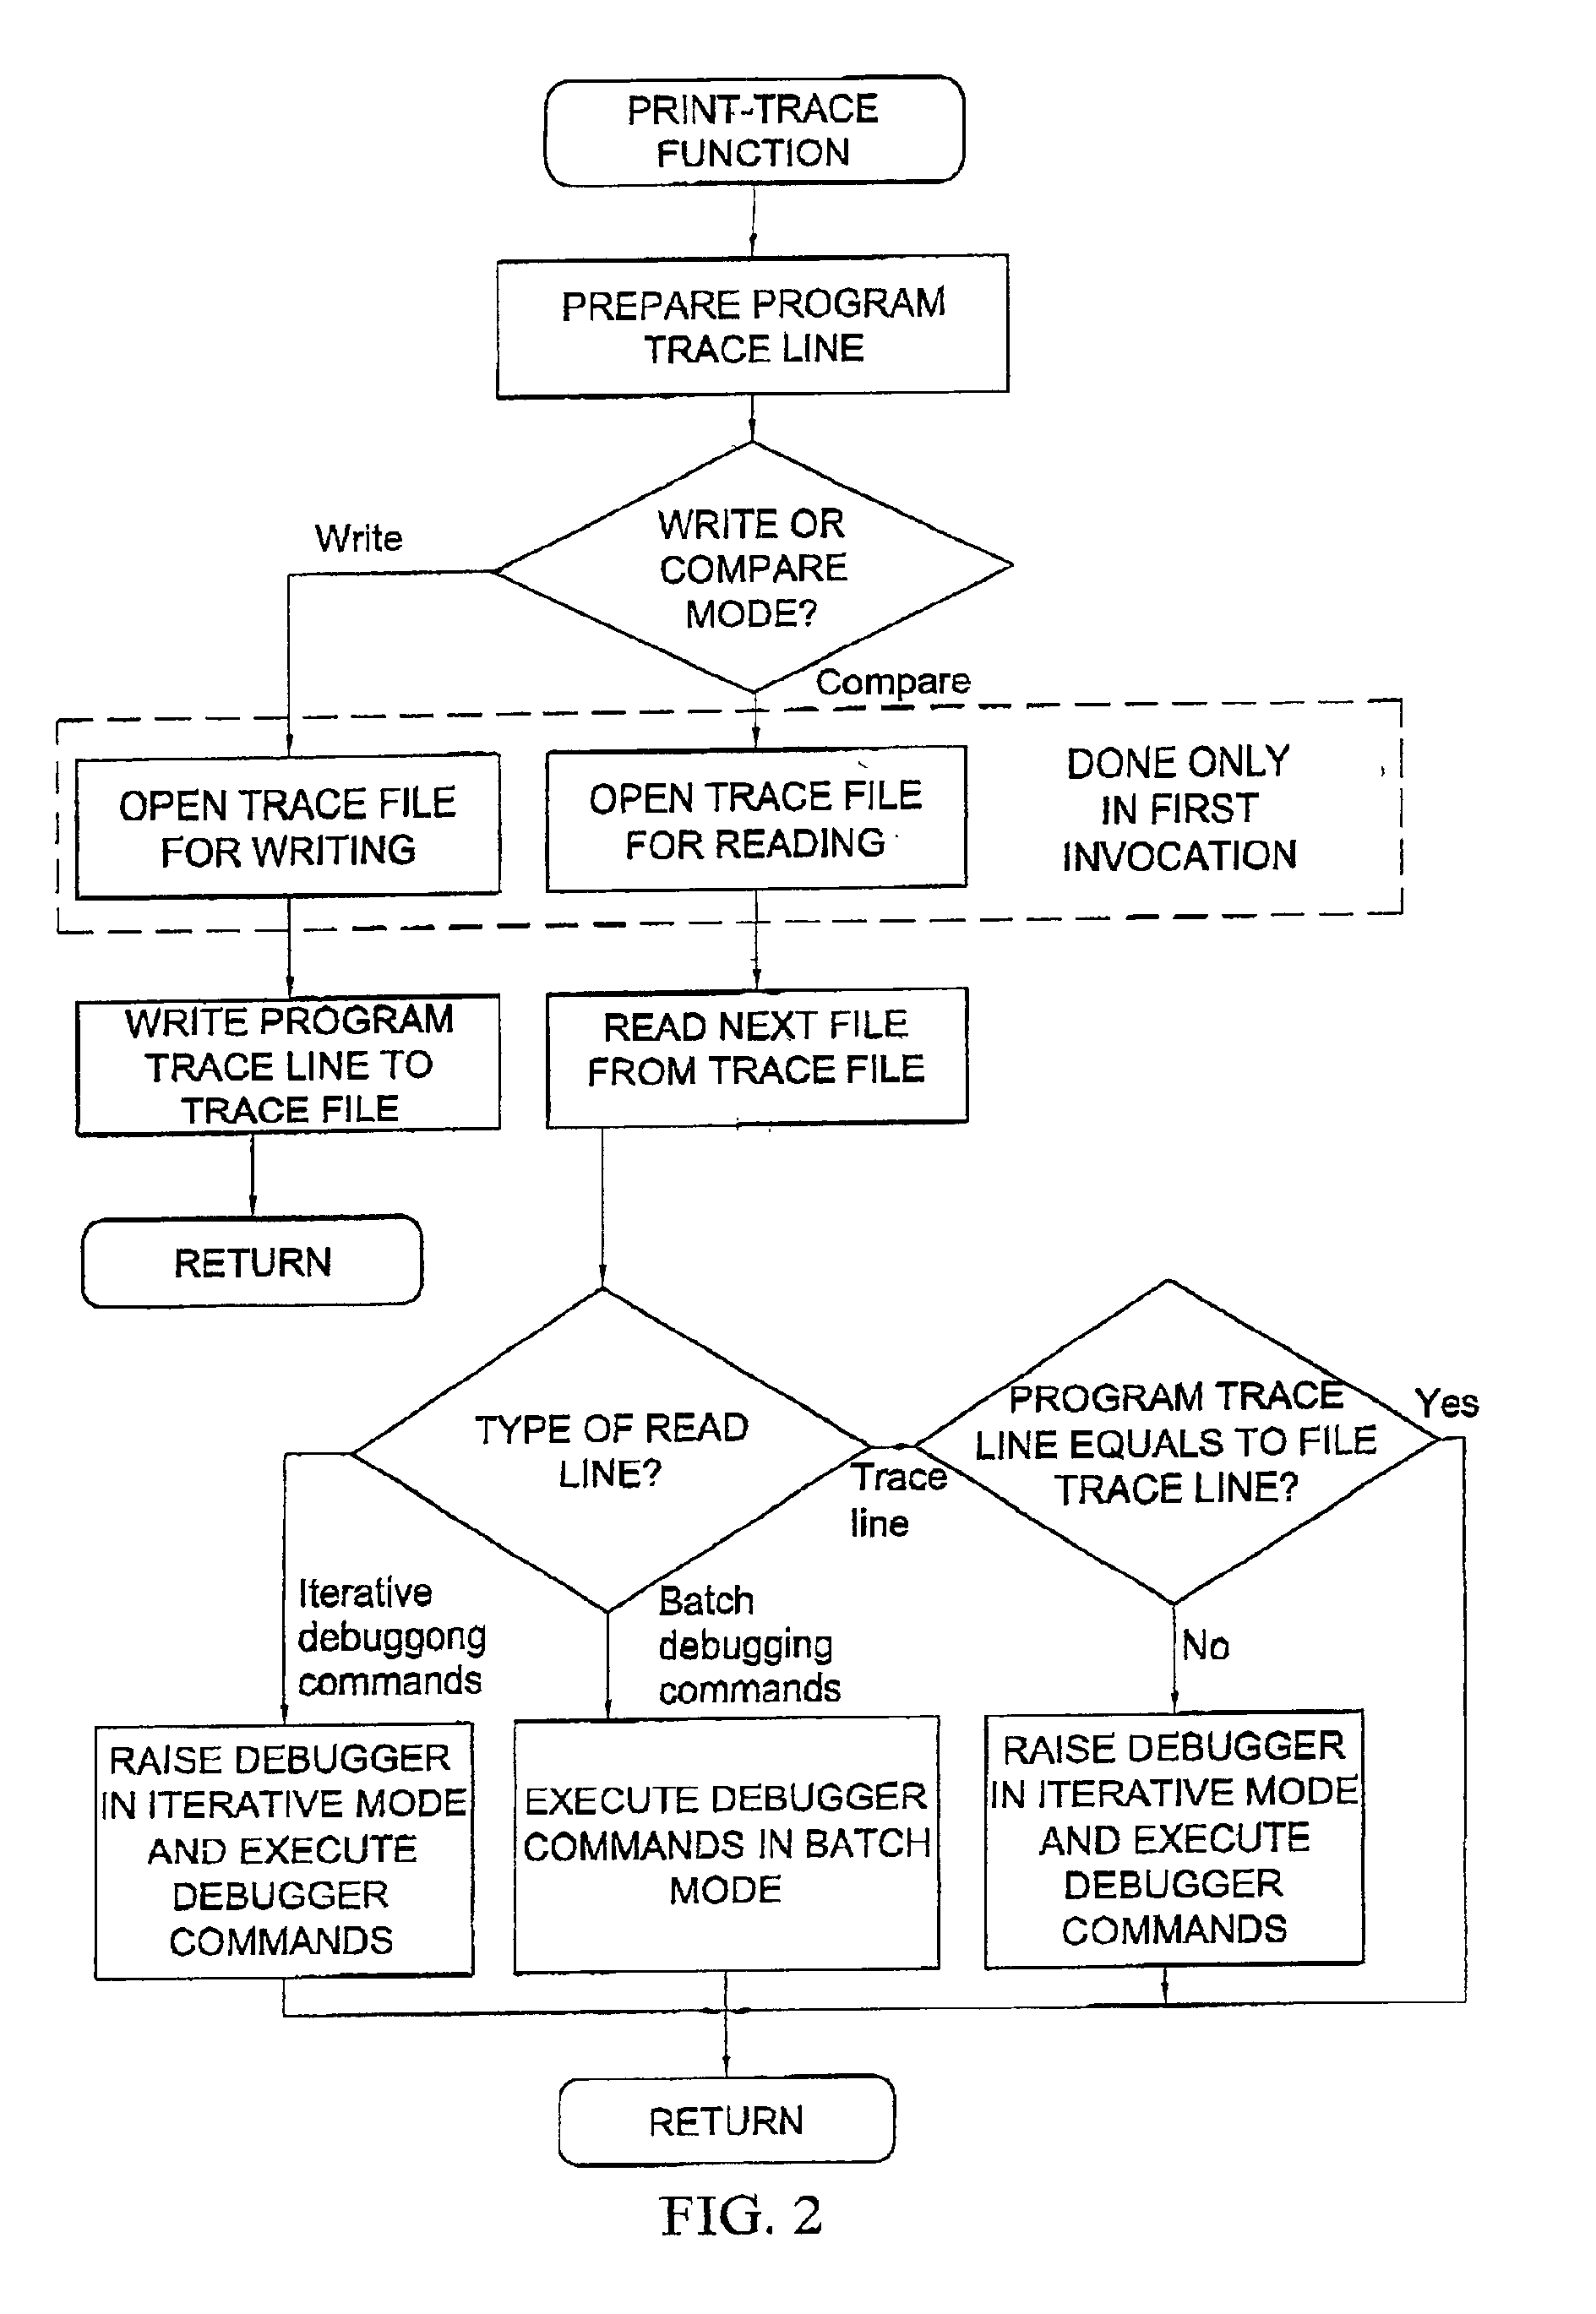 Computer-implemented method and system for automatically invoking a predetermined debugger command at a desired location of a single thread of a program